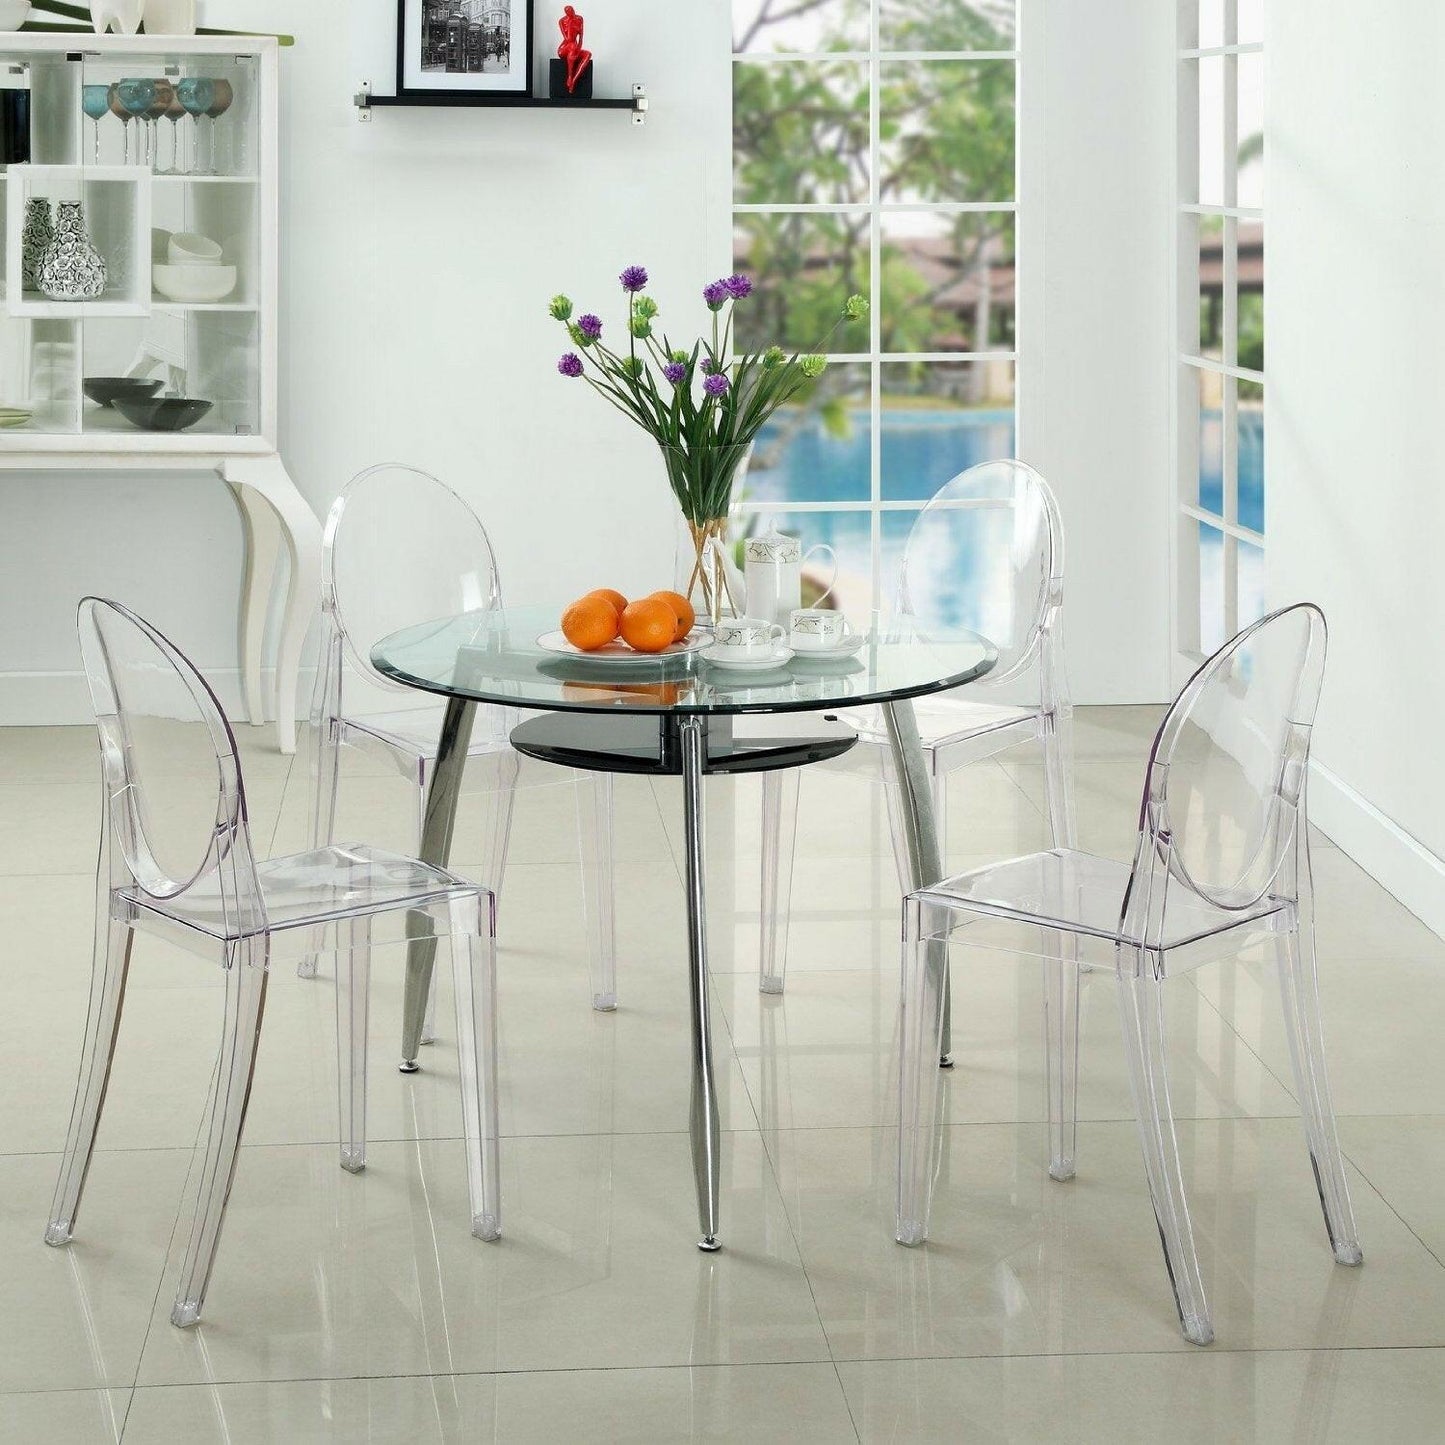 Stackable Clear Acrylic Dining Chair for Indoor or Outdoor Use - FurniFindUSA